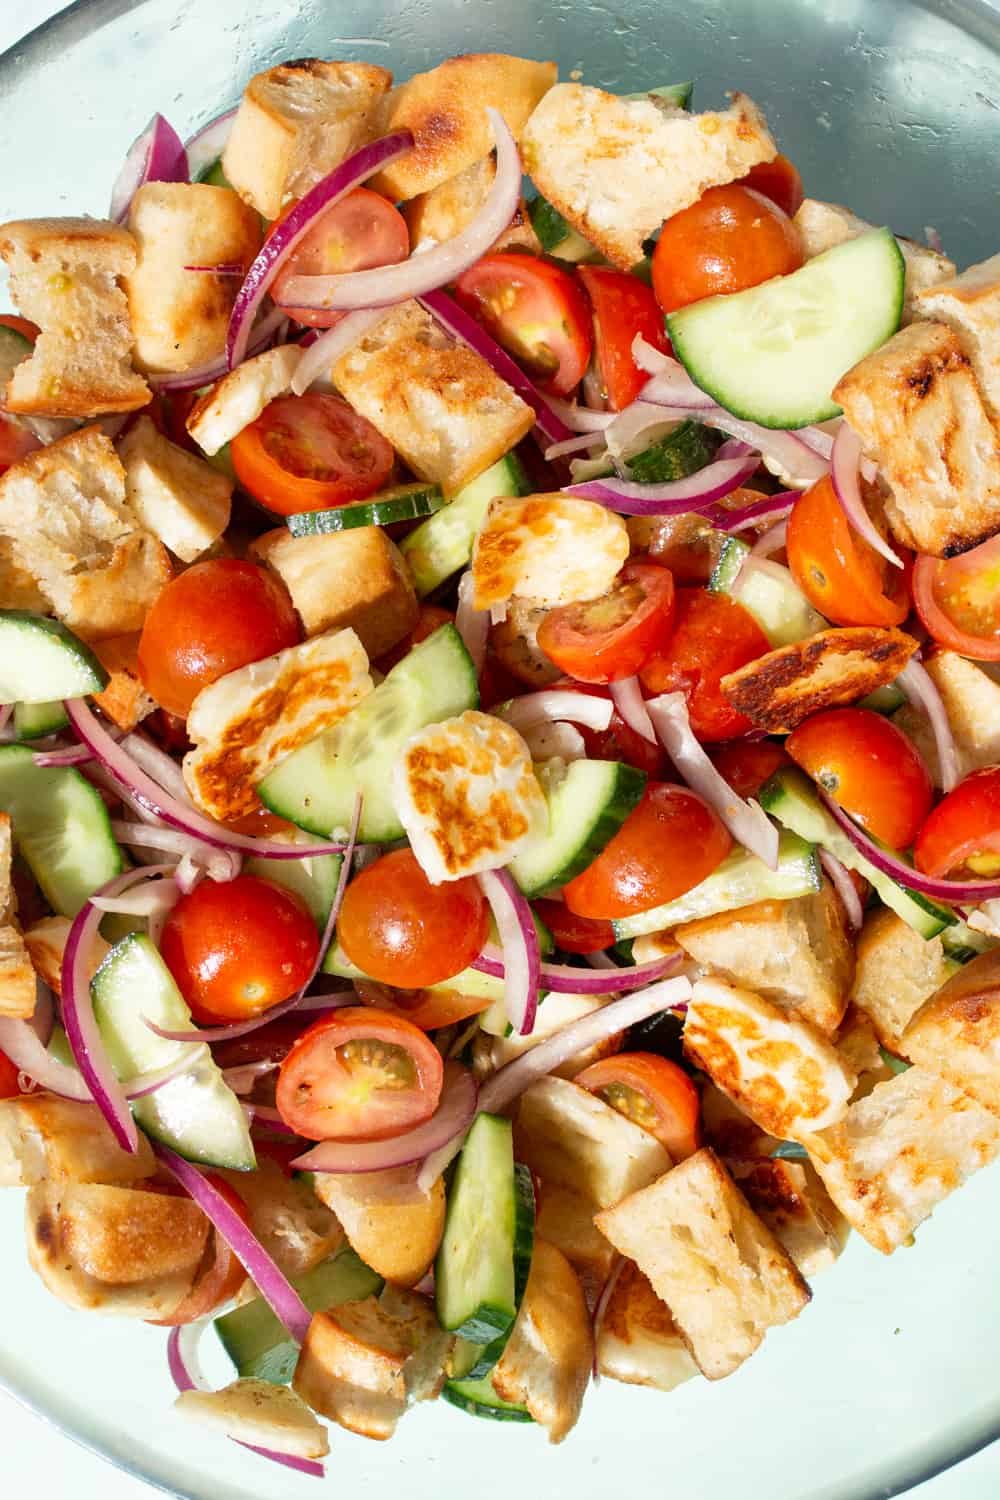 Close up of Halloumi Panzanella salad in a glass bowl with cherry tomatoes, cucumber, red onion, browned halloumi and ciabatta bread pieces.